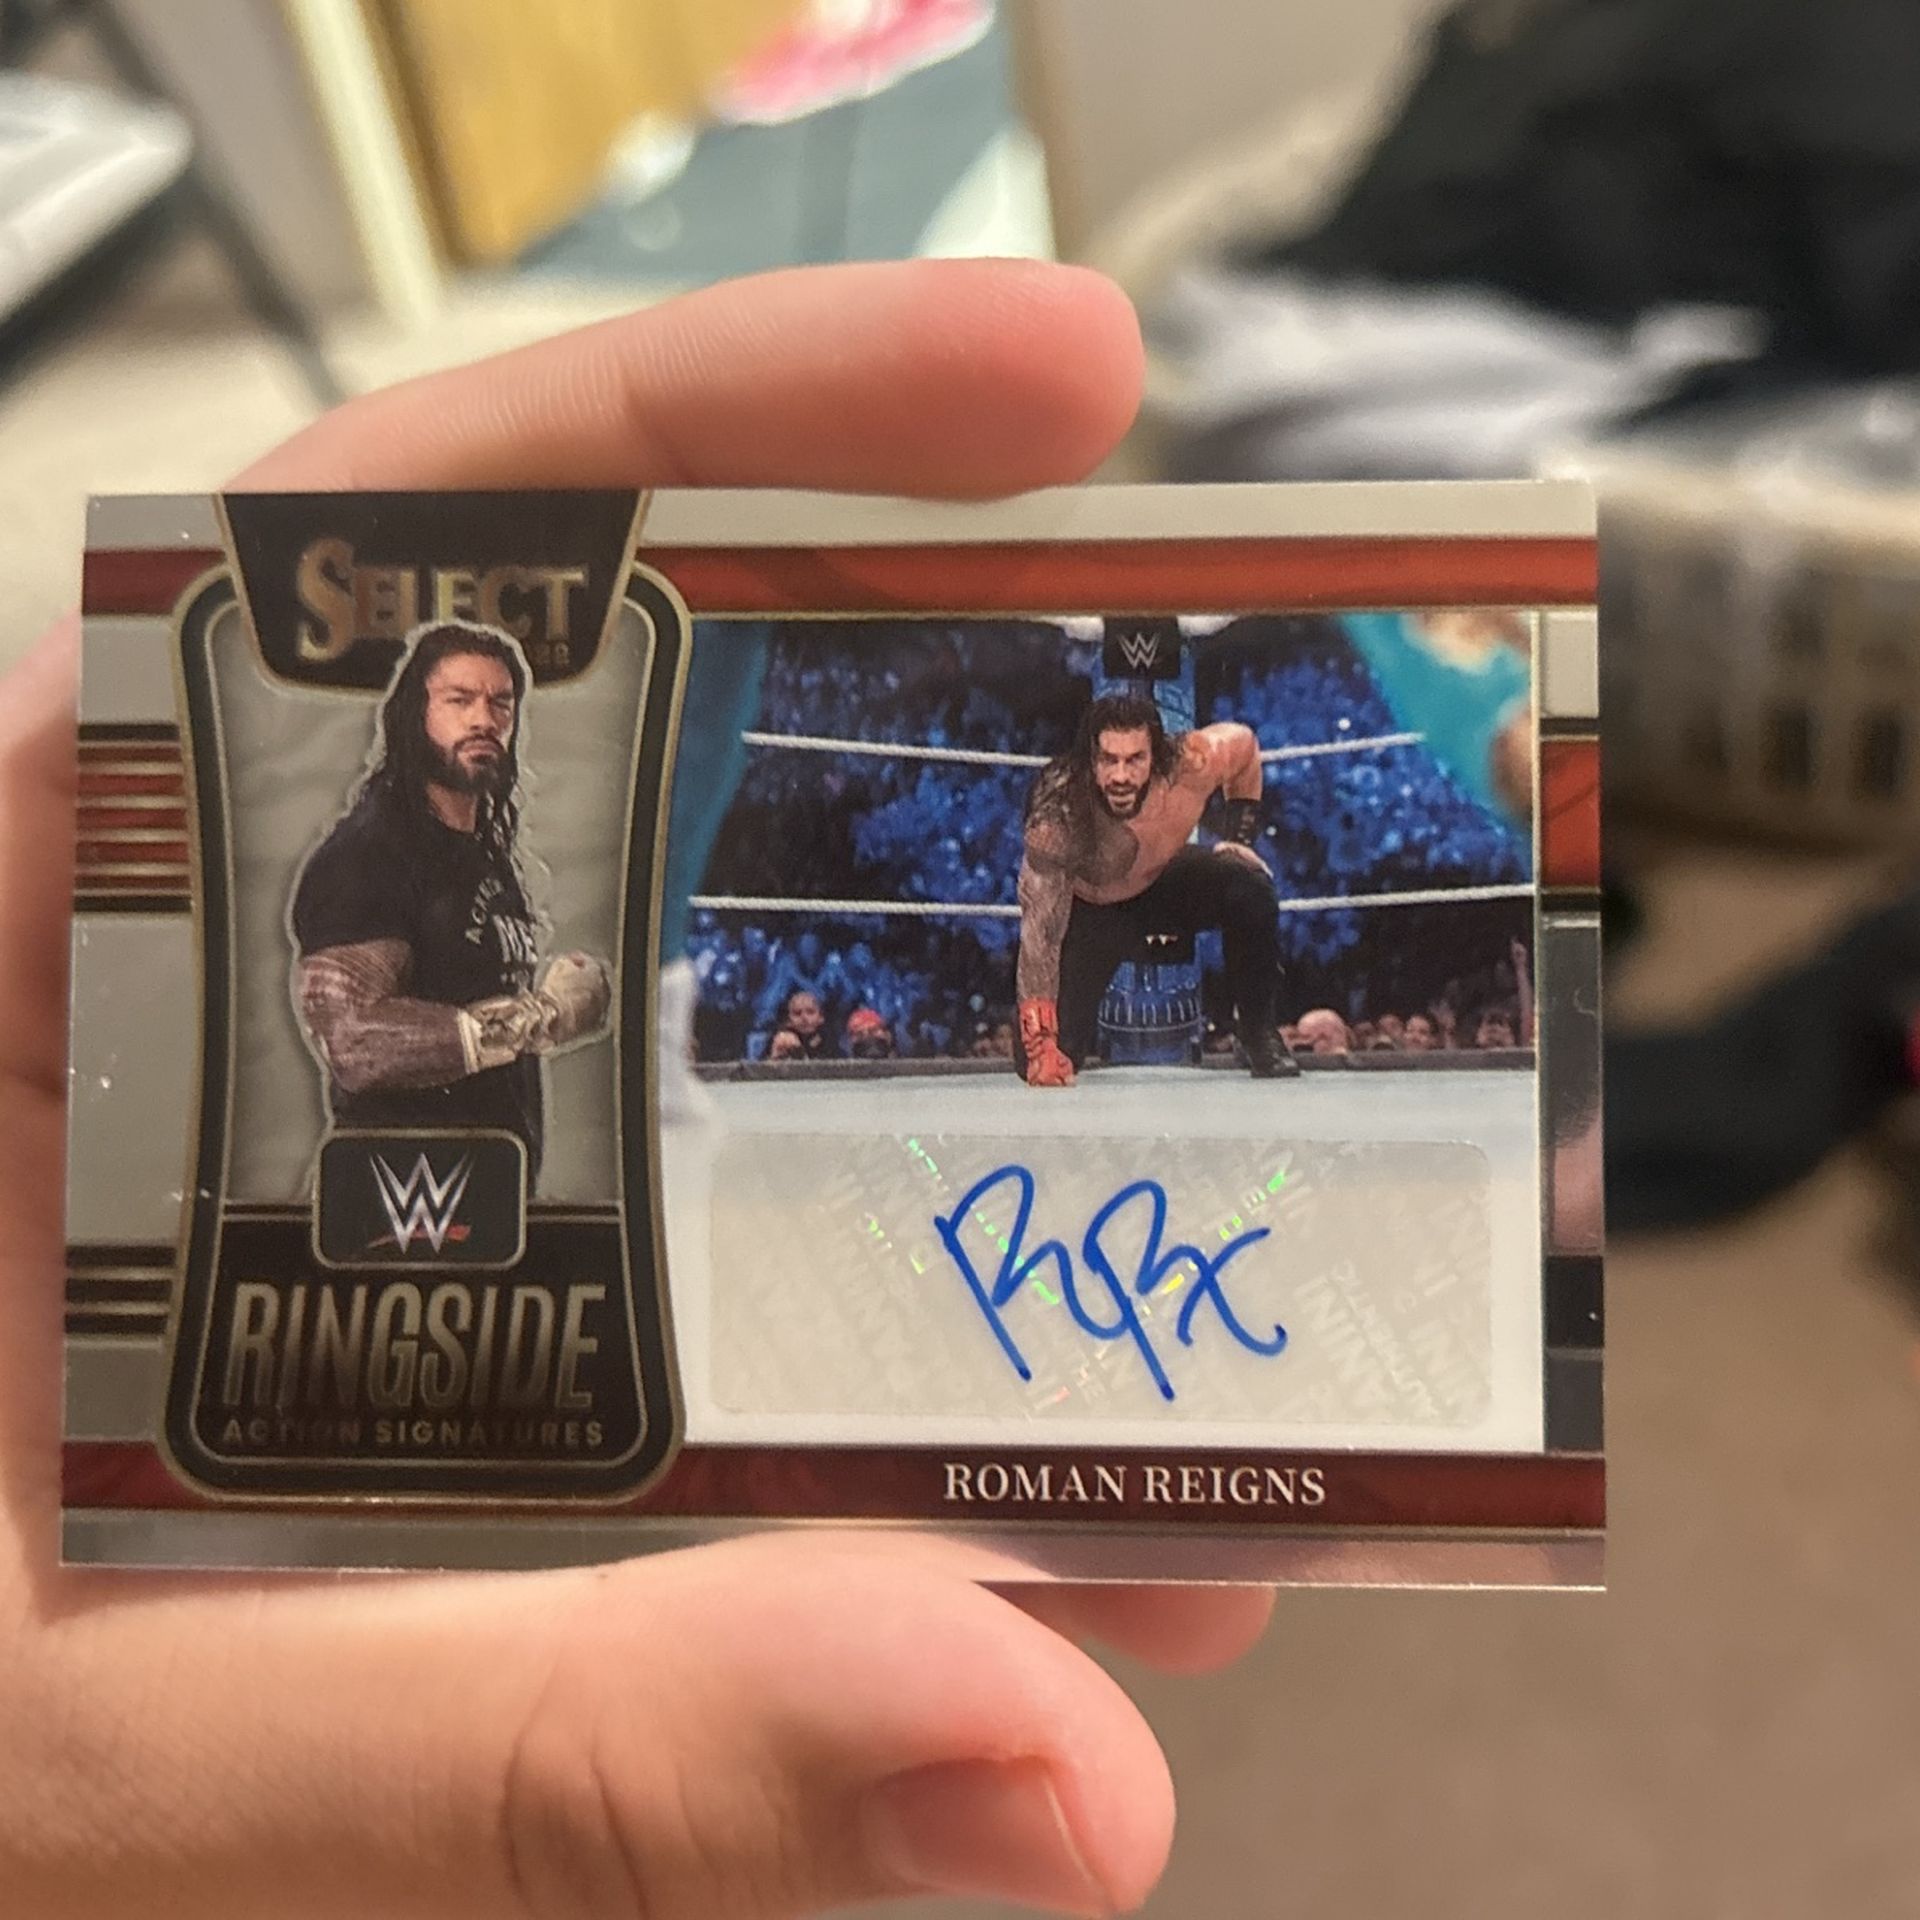 Roman Reigns Signed WWE Card